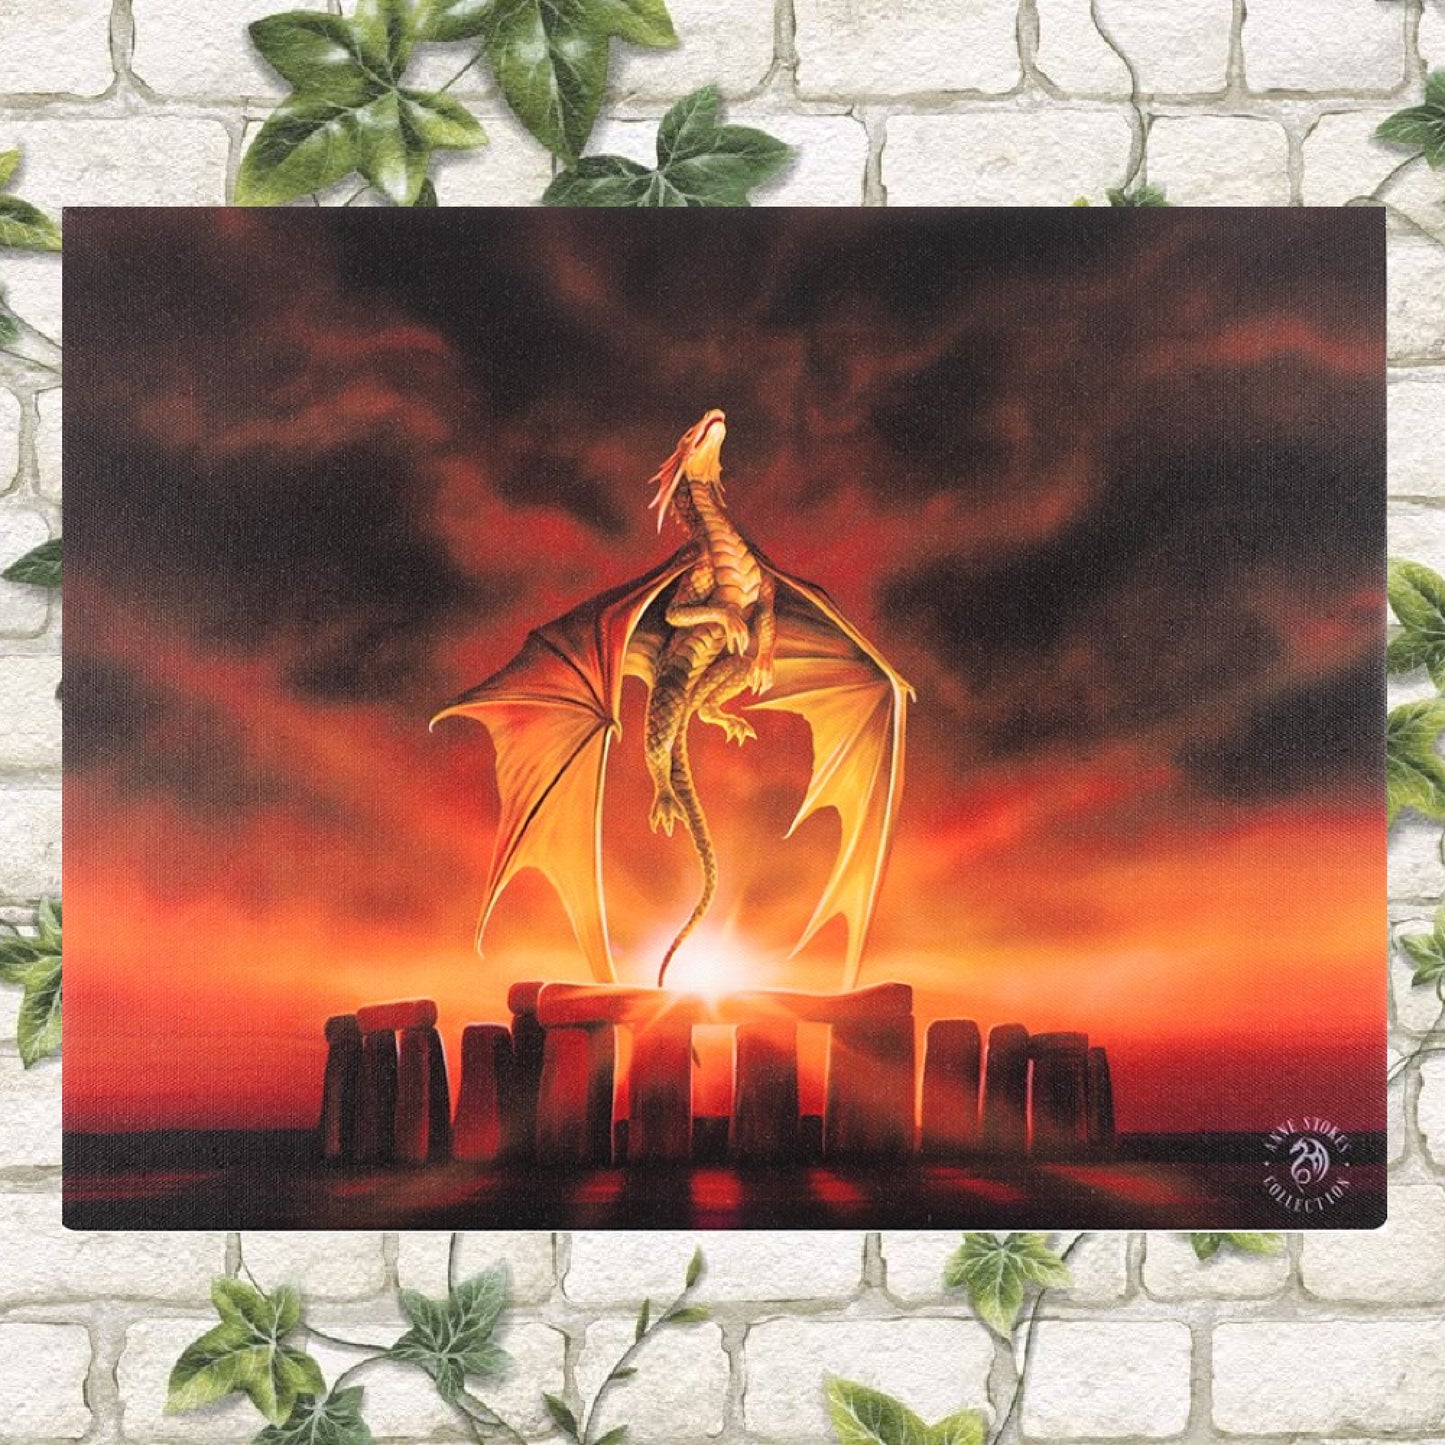 A stunning 25 x 19cm wall canvas featuring the Solstice Dragon, rising above Stonehenge design by licensed artist Anne Stokes.